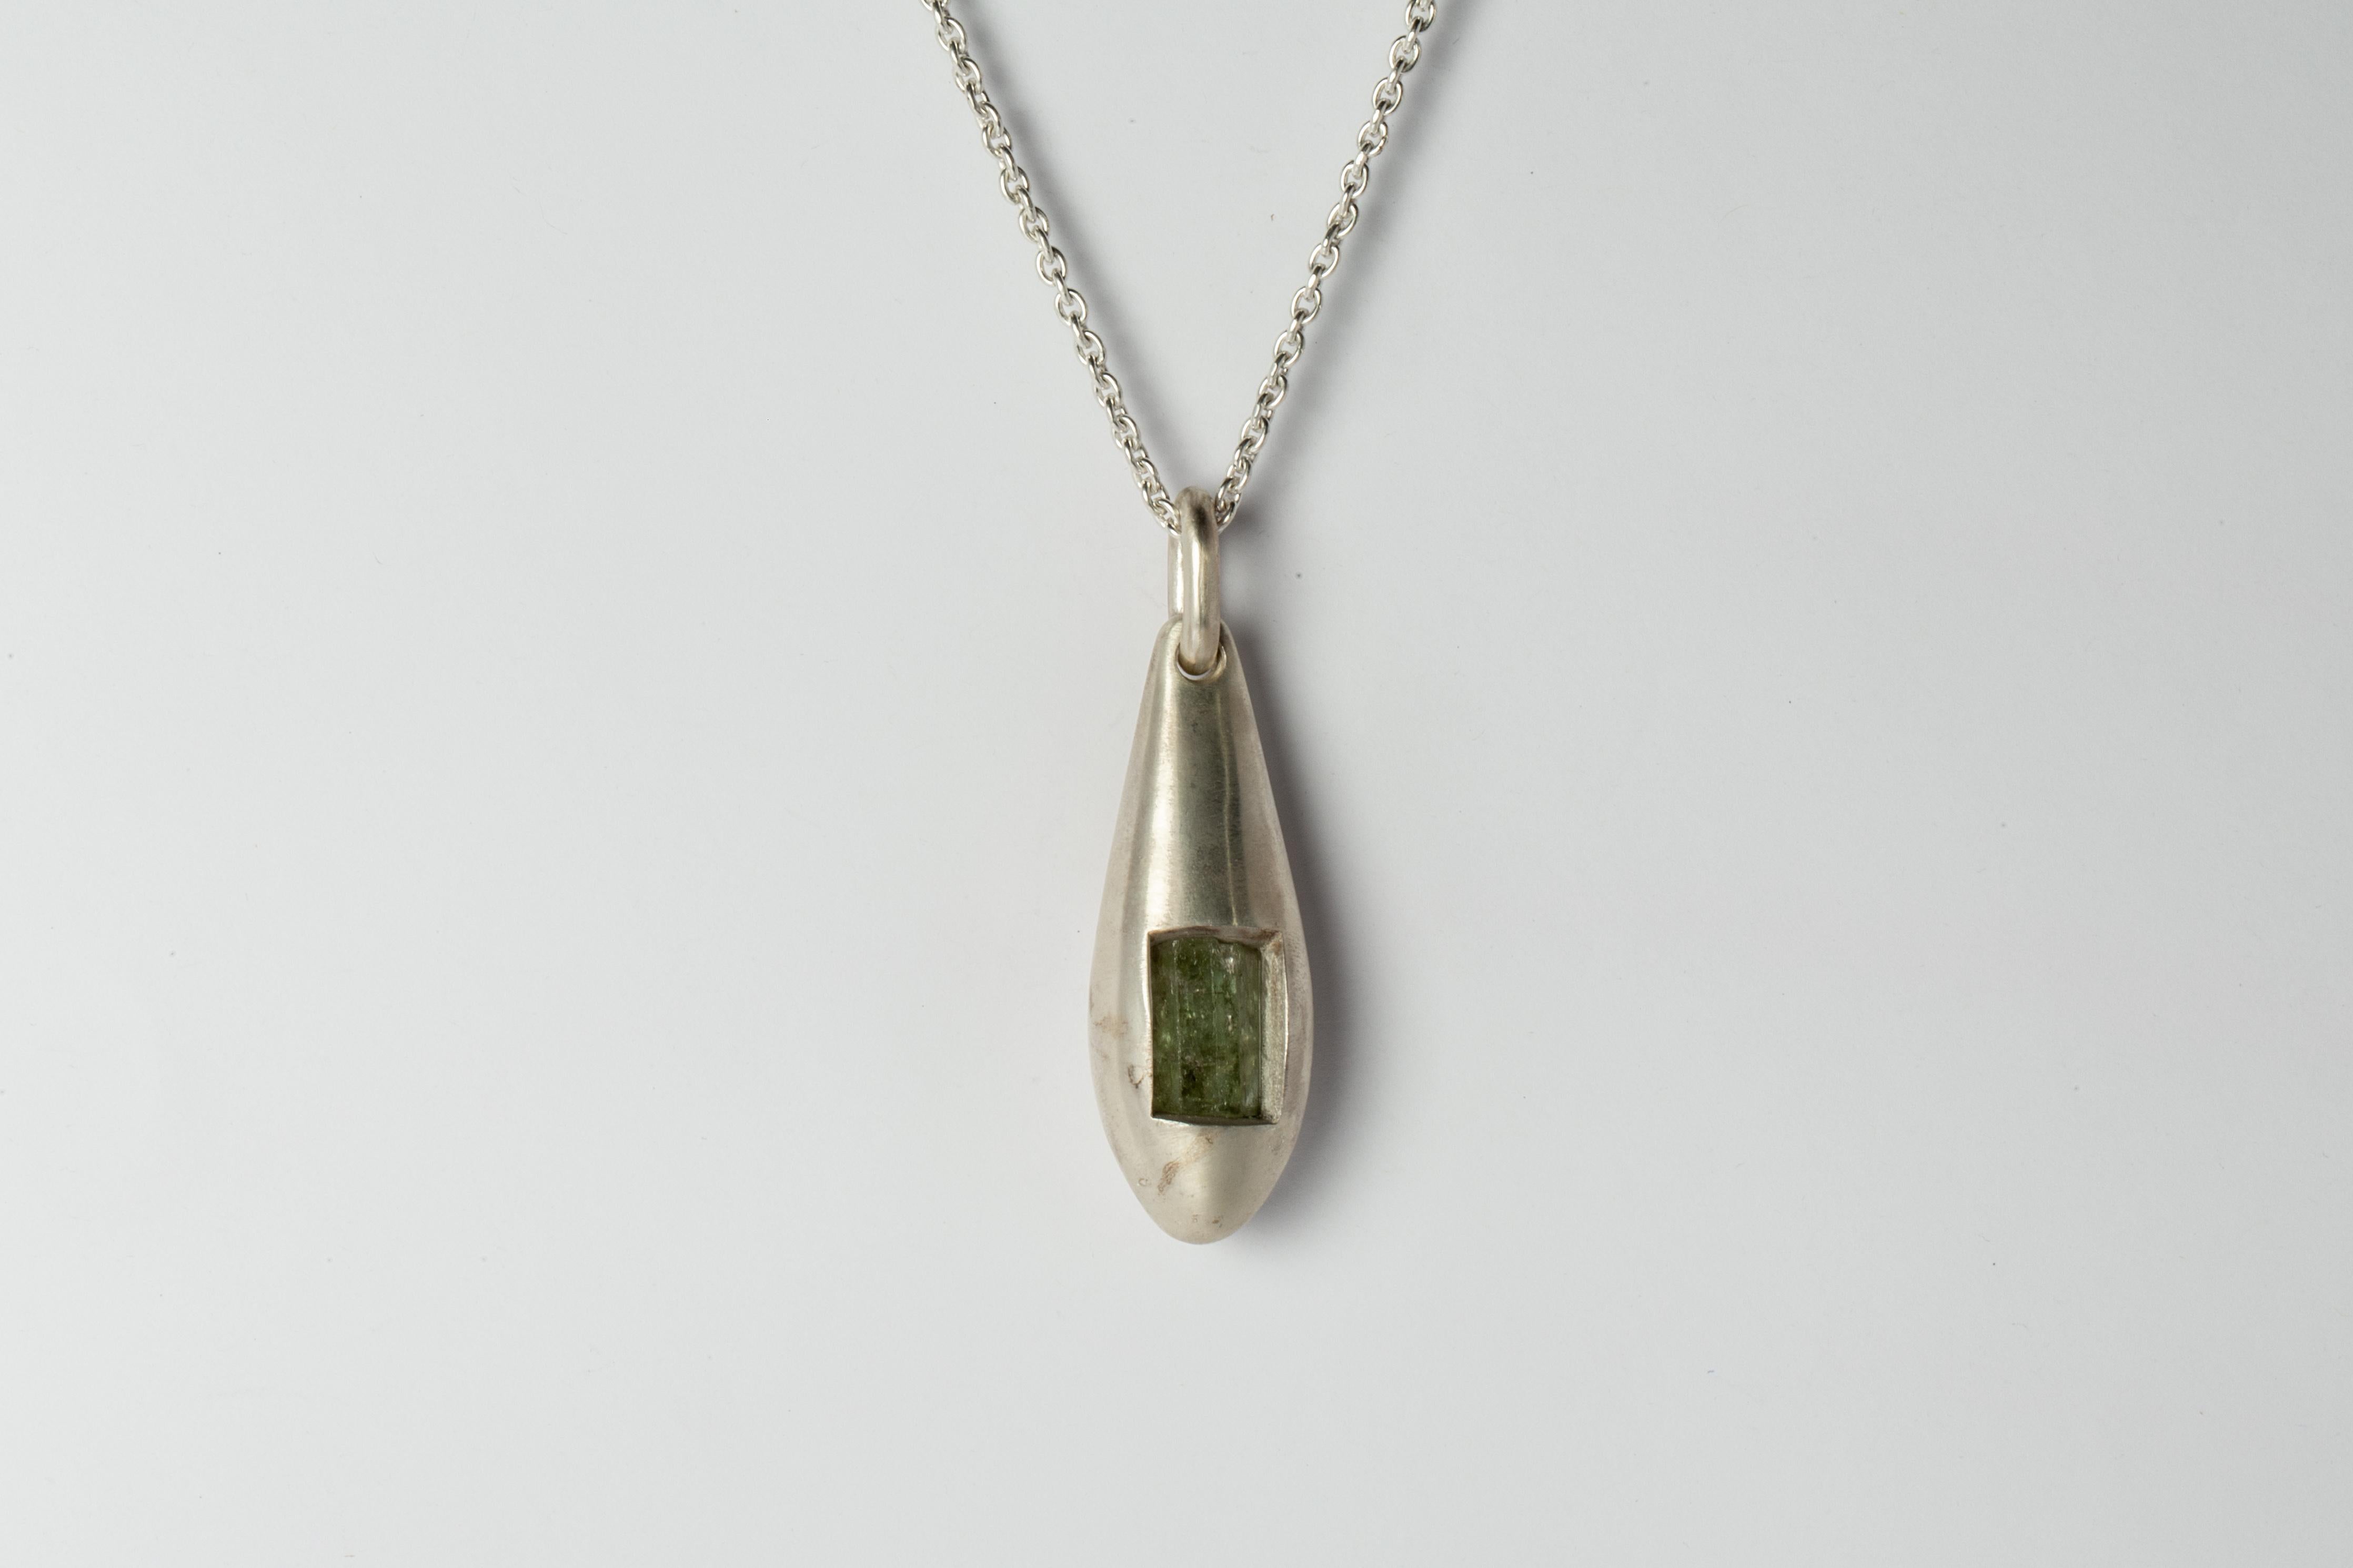 Pendant necklace made in matte sterling silver and a slab of rough heliodor. It comes on 74 cm sterling silver chain.